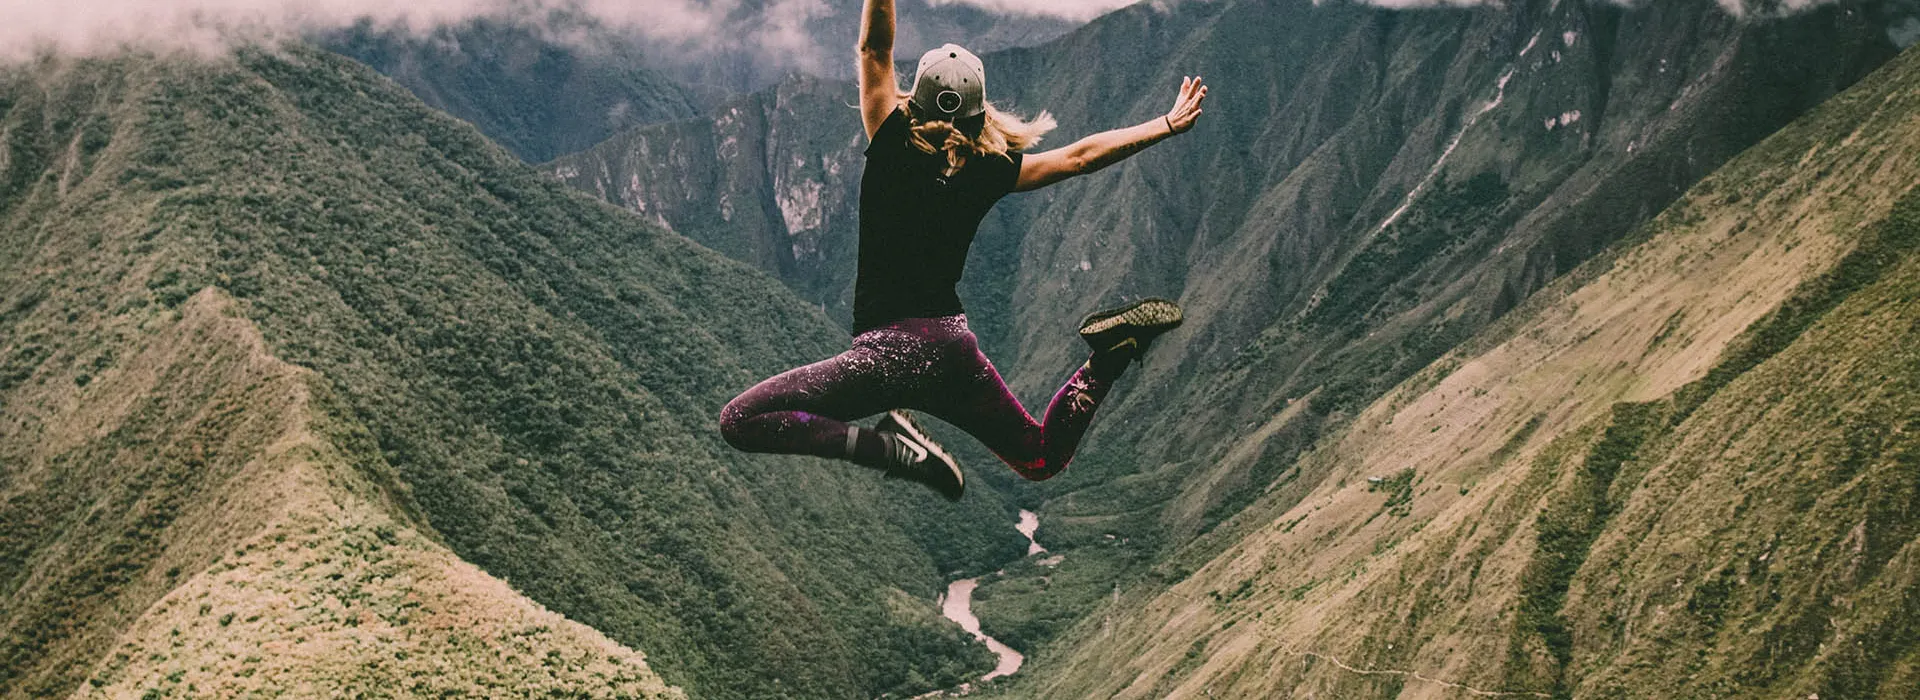 person jumping on a mountain 